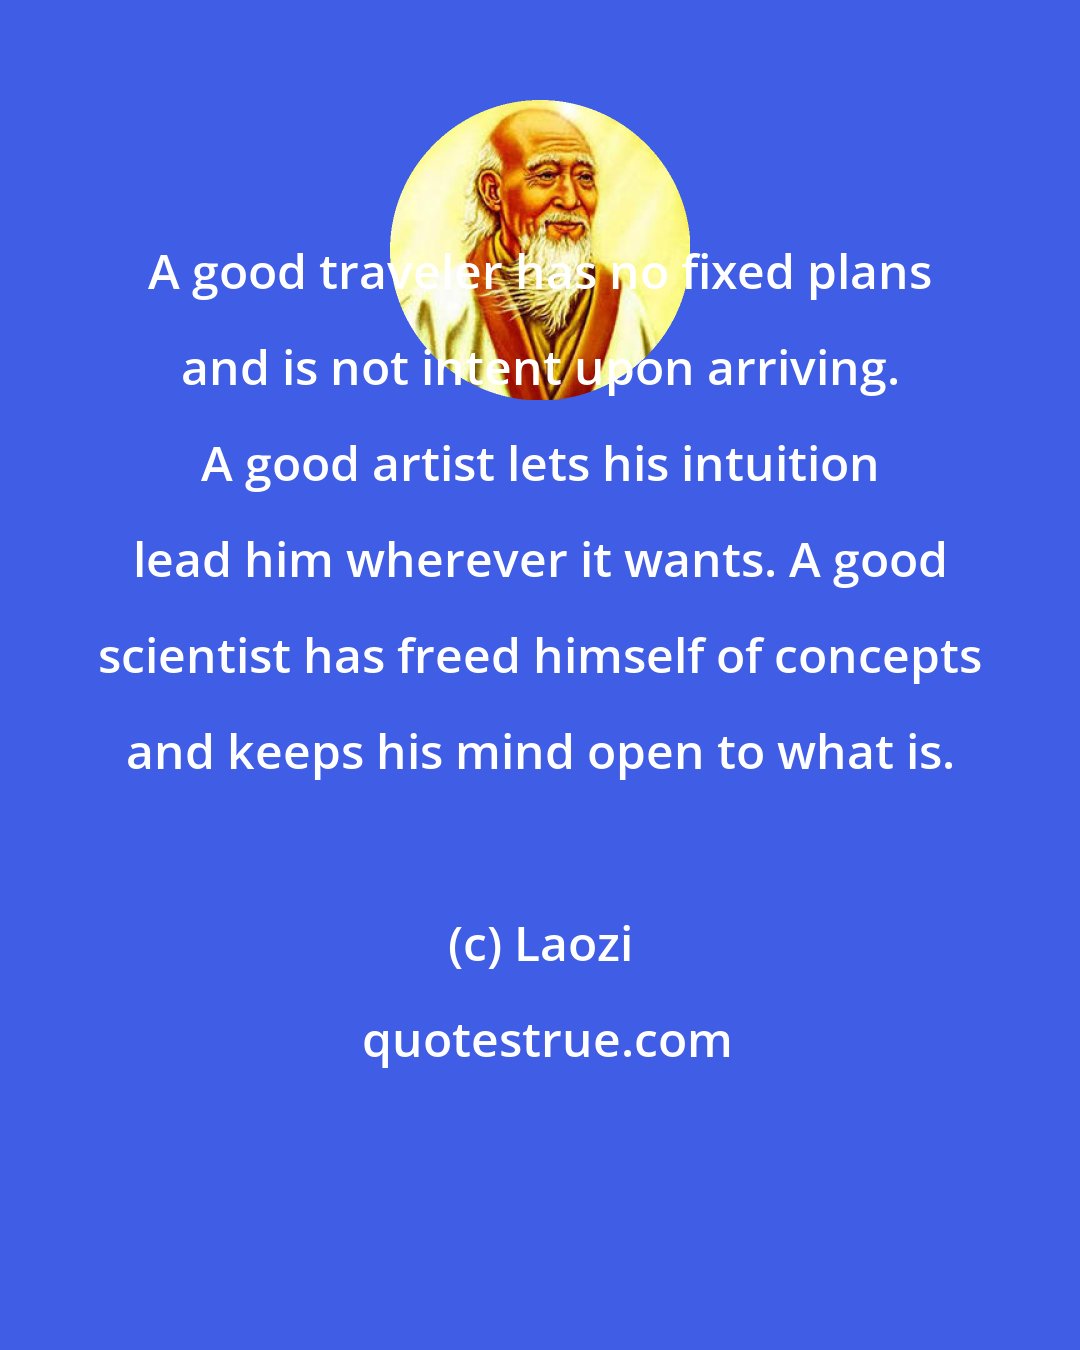 Laozi: A good traveler has no fixed plans and is not intent upon arriving. A good artist lets his intuition lead him wherever it wants. A good scientist has freed himself of concepts and keeps his mind open to what is.